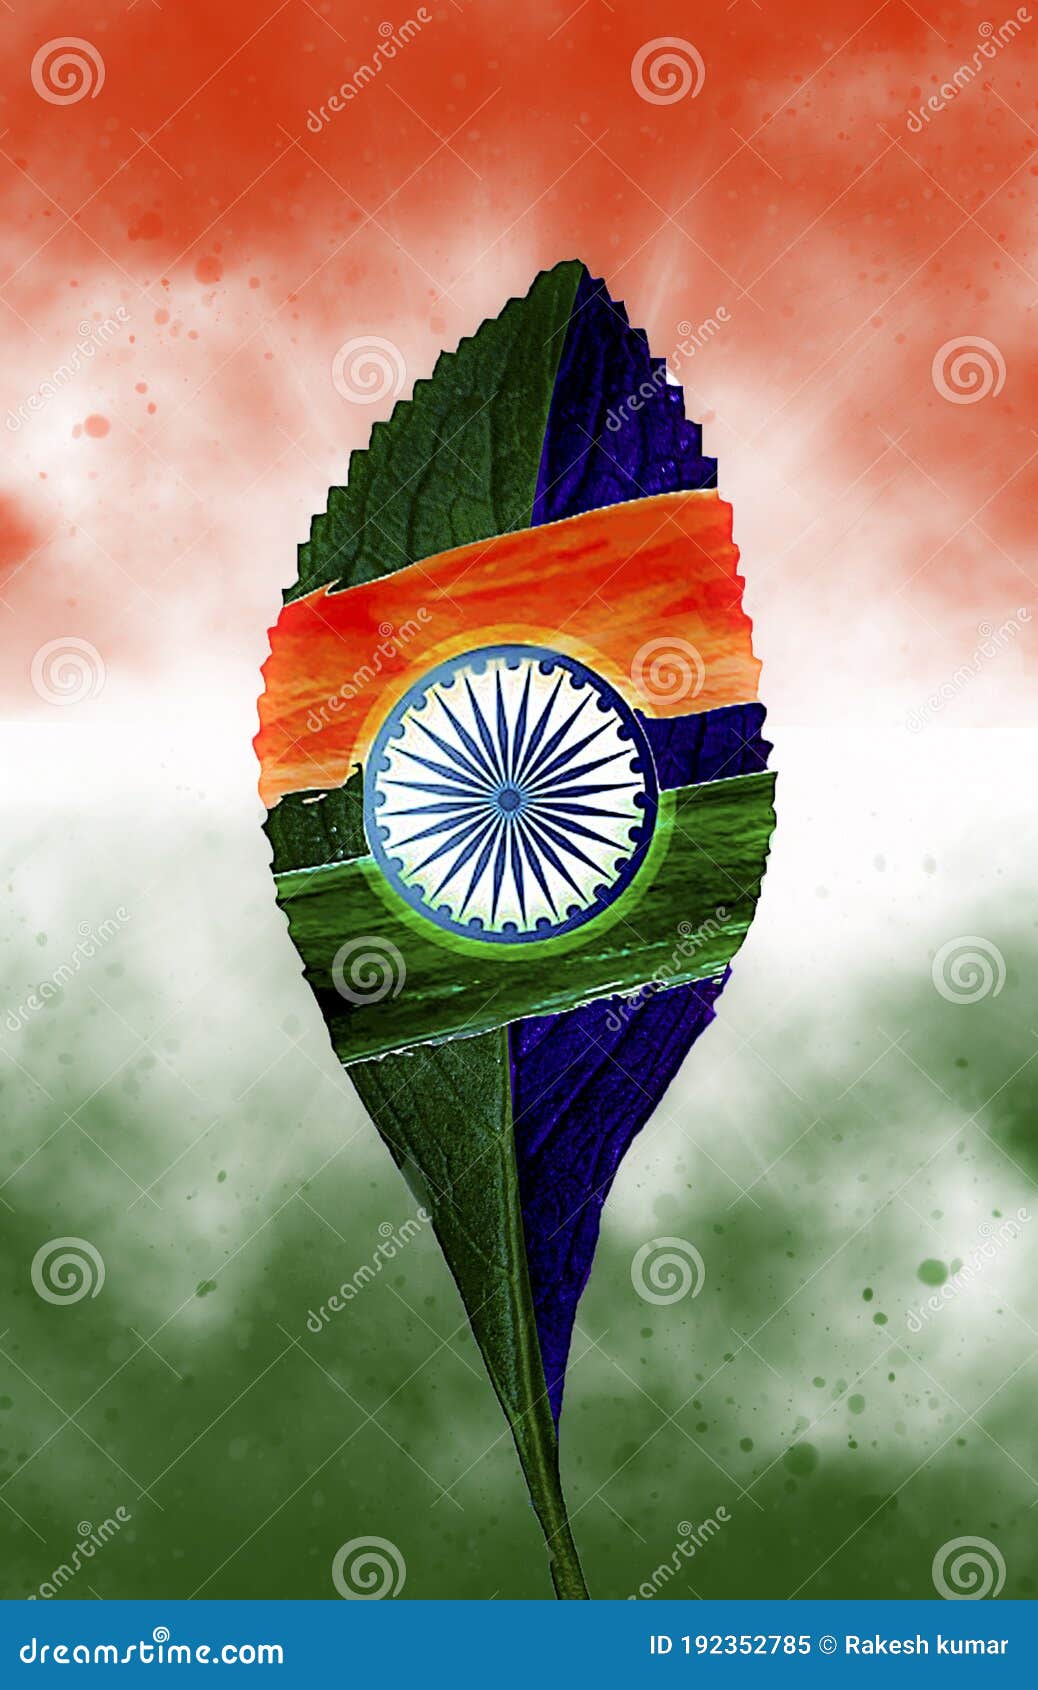 India Flag Best Wallpaper Hd Stock Image - Image of backgrounds, colourful:  192352785